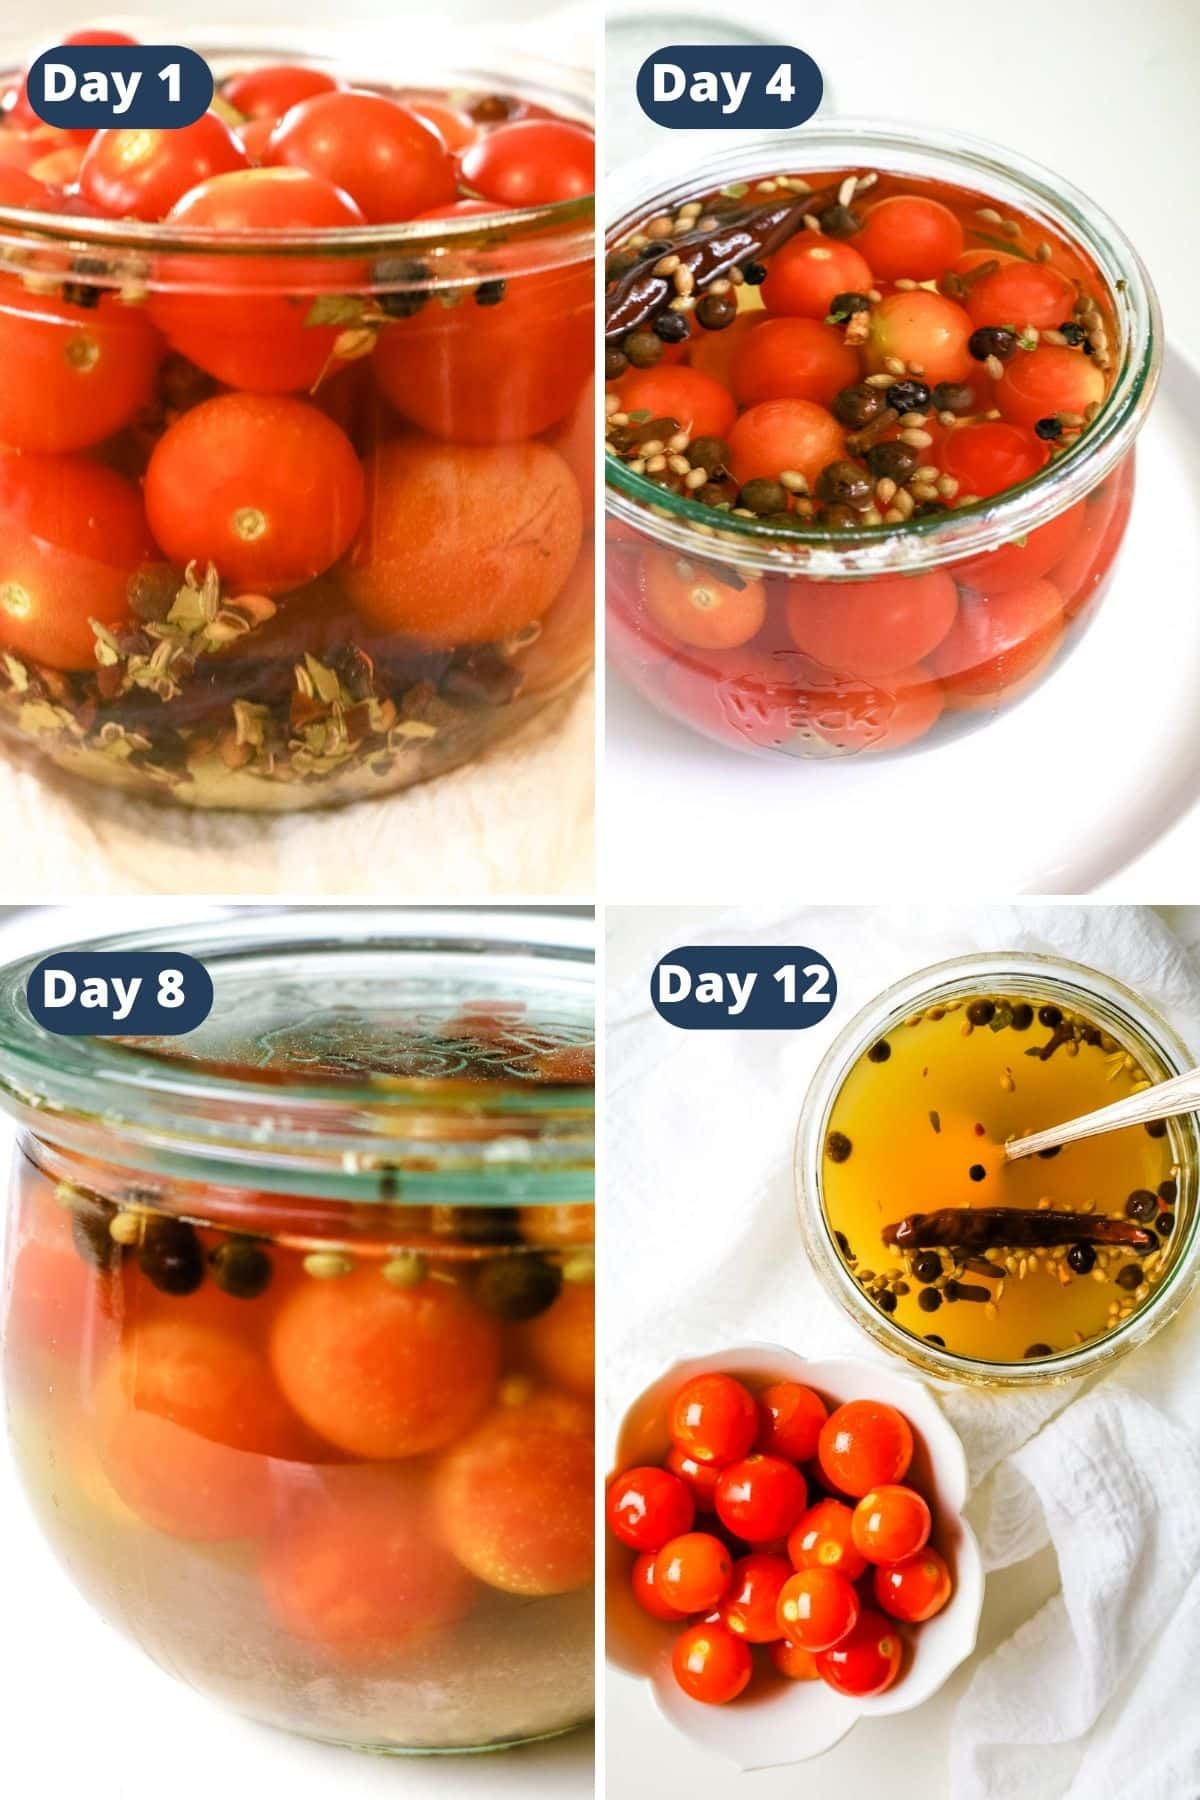 timeline of fermented tomatoes shows gradual cloudiness of brine.